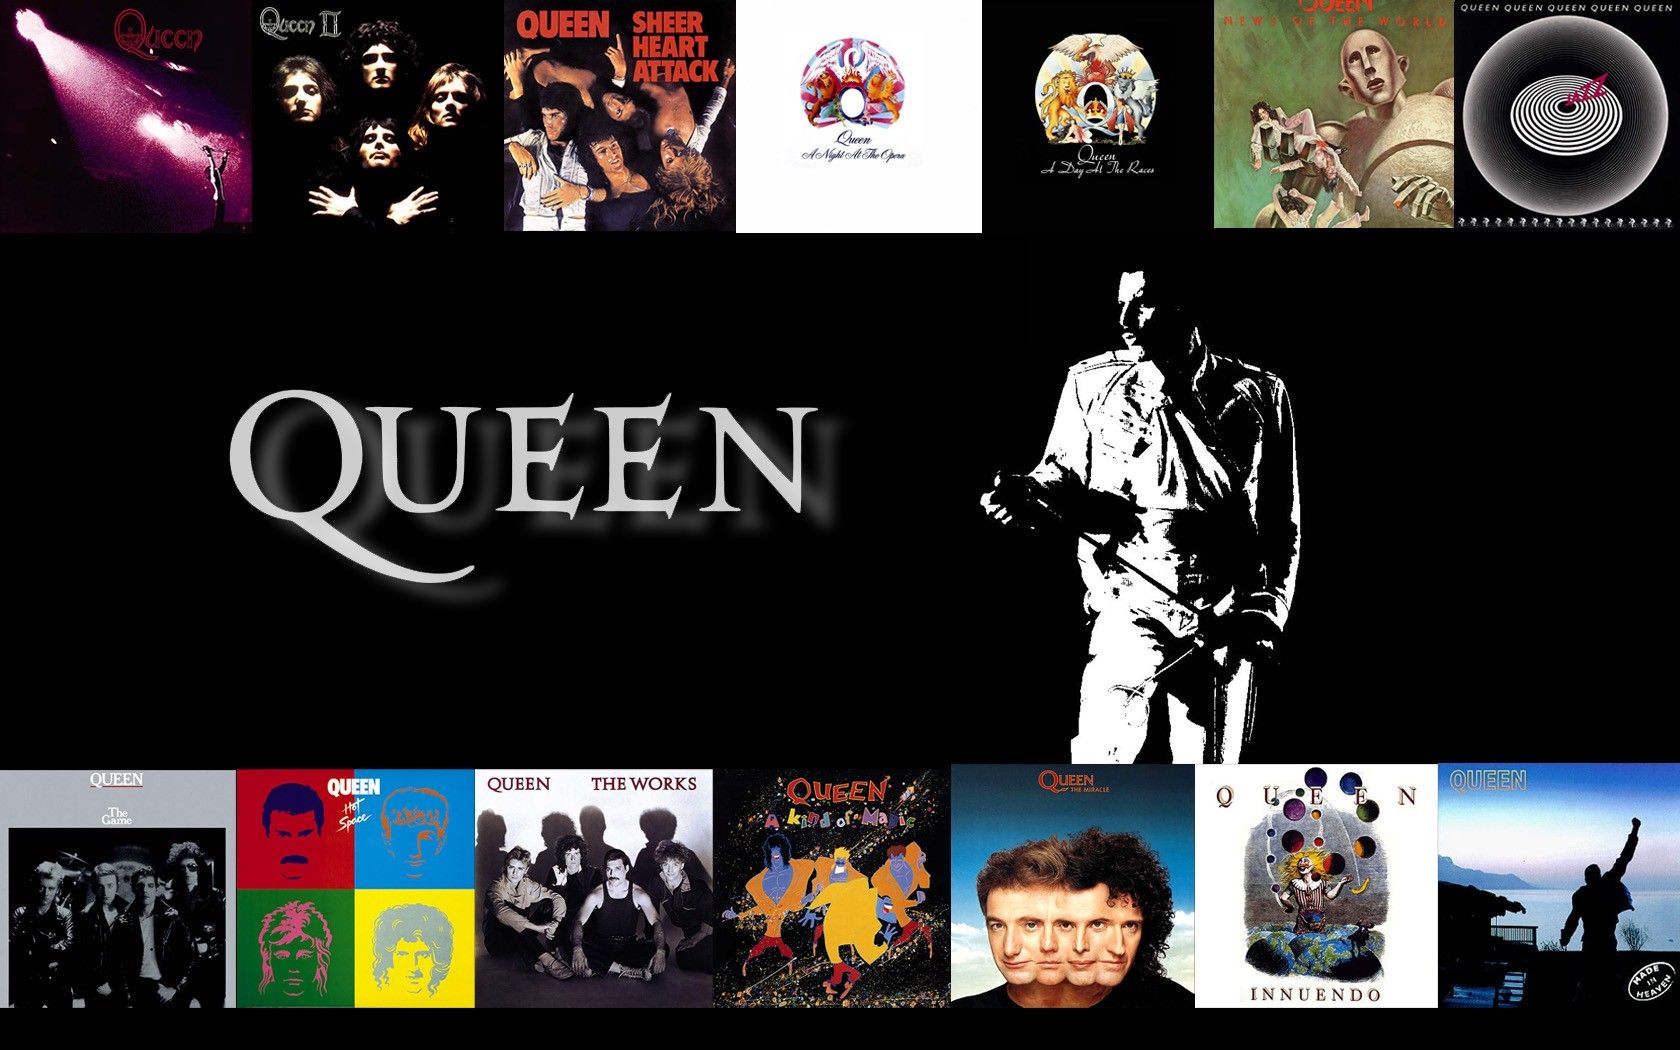 A collage of different album covers with the word queen on them - 